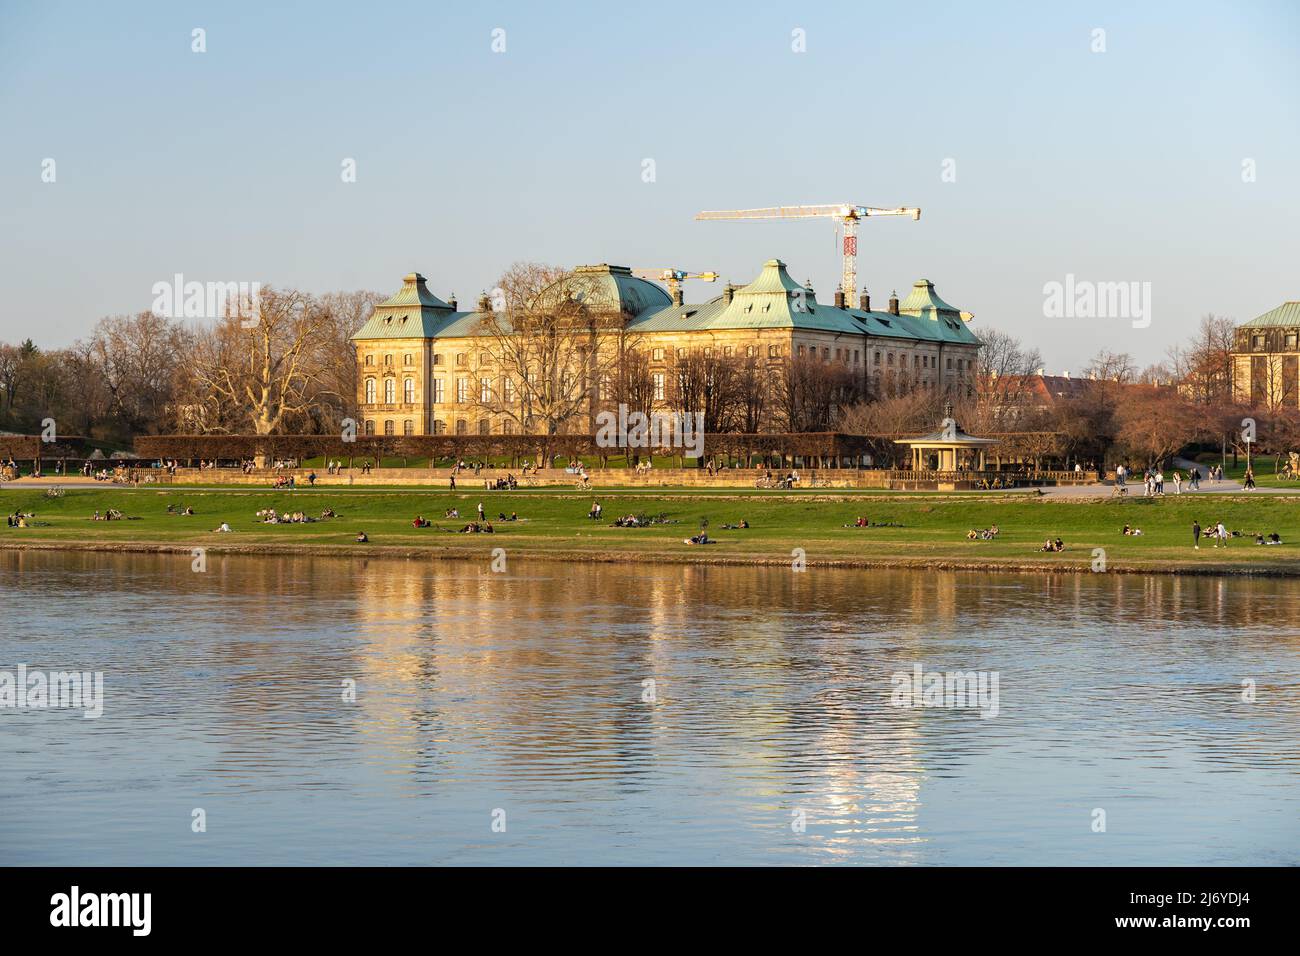 Japanese palace museum on the other side if the elbe river on a sunny springtime day. The sunset light is shining on the historic building exterior. Stock Photo